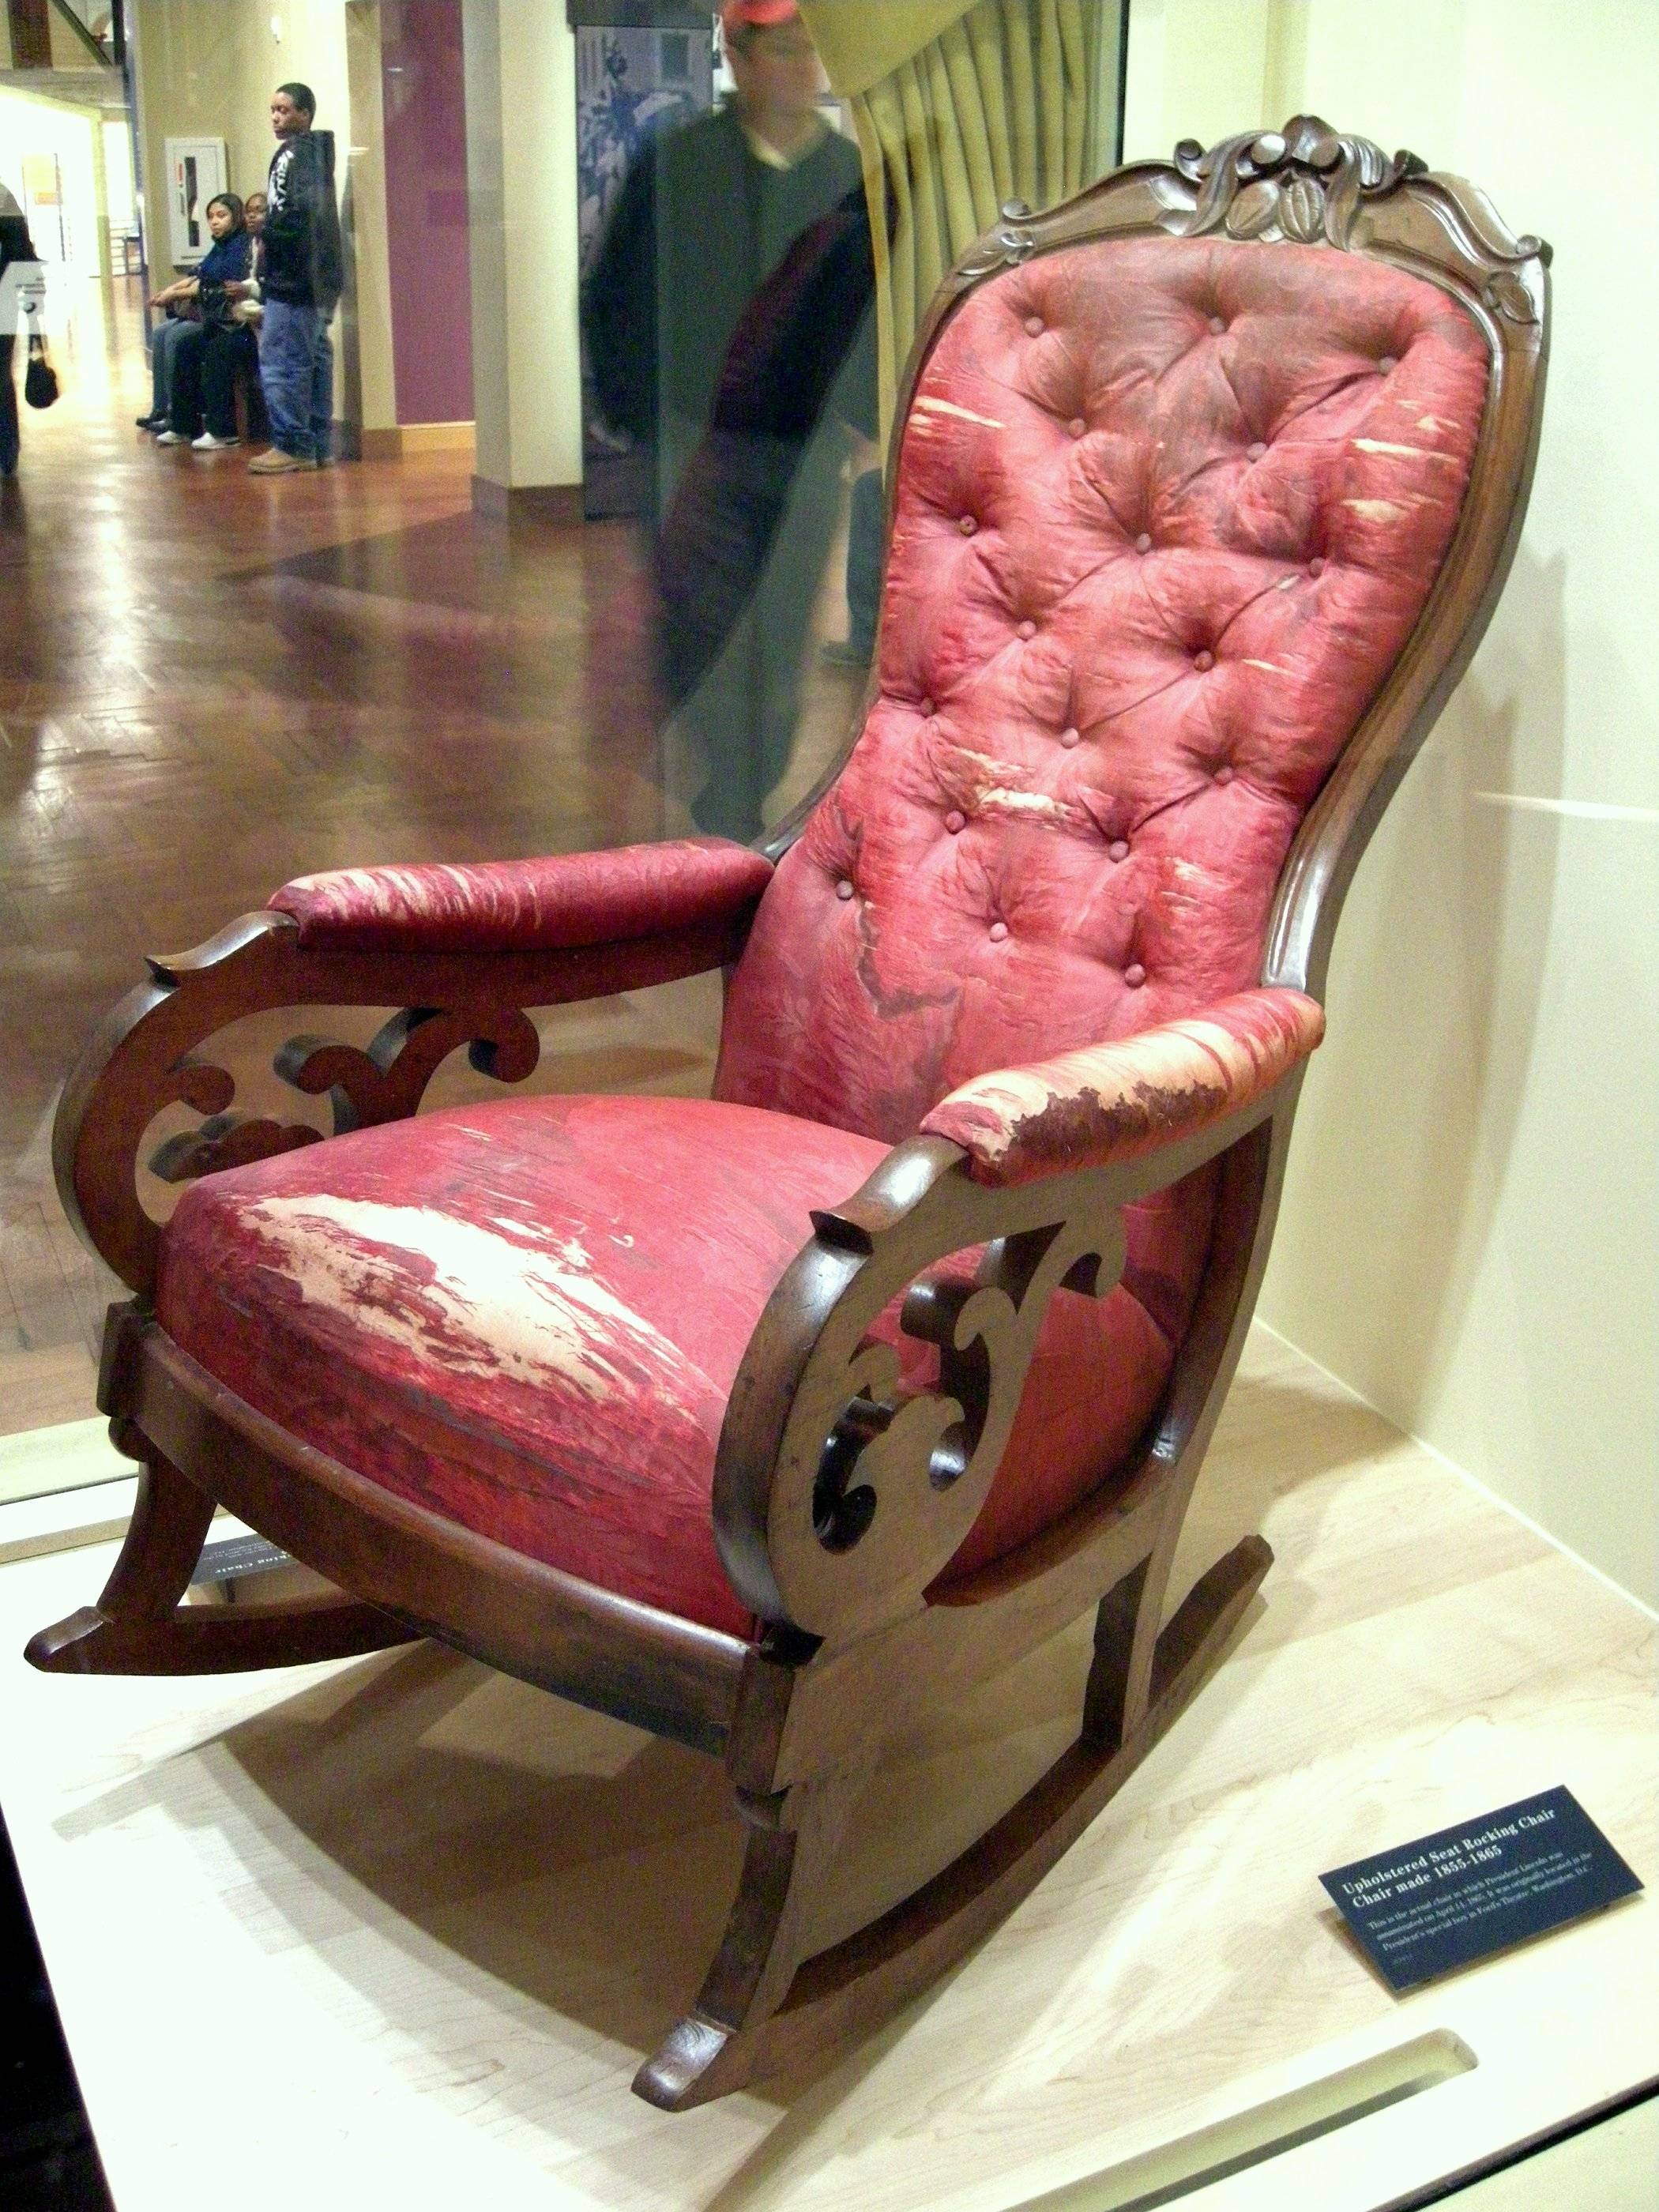 Abraham Lincoln assassination chair from Ford's Theatre